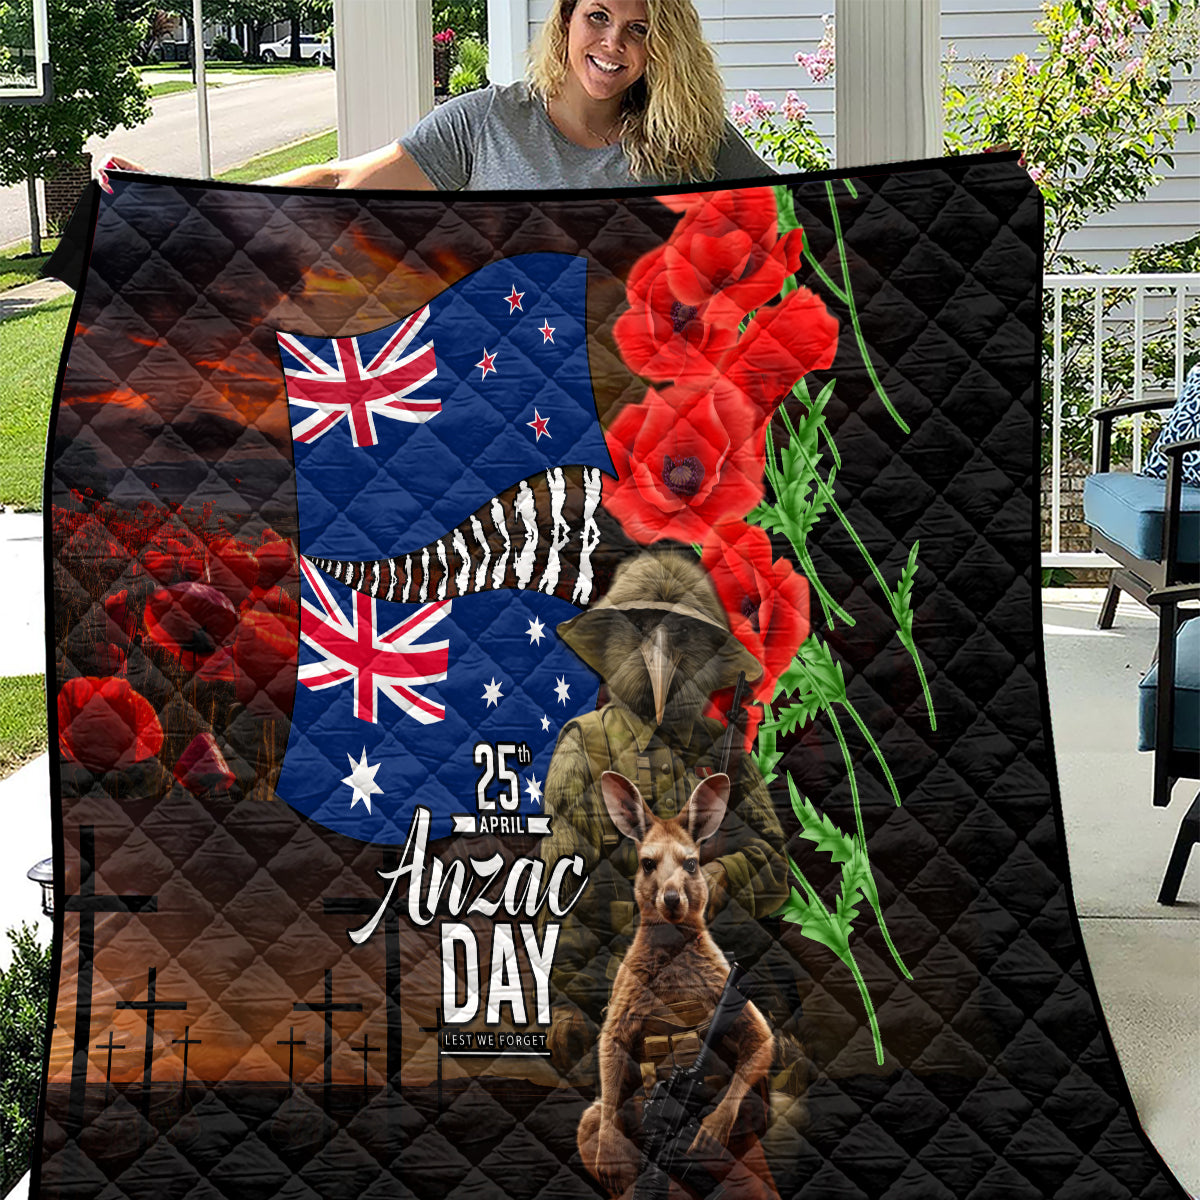 New Zealand and Australia ANZAC Day Quilt National Flag mix Kiwi Bird and Kangaroo Soldier Style